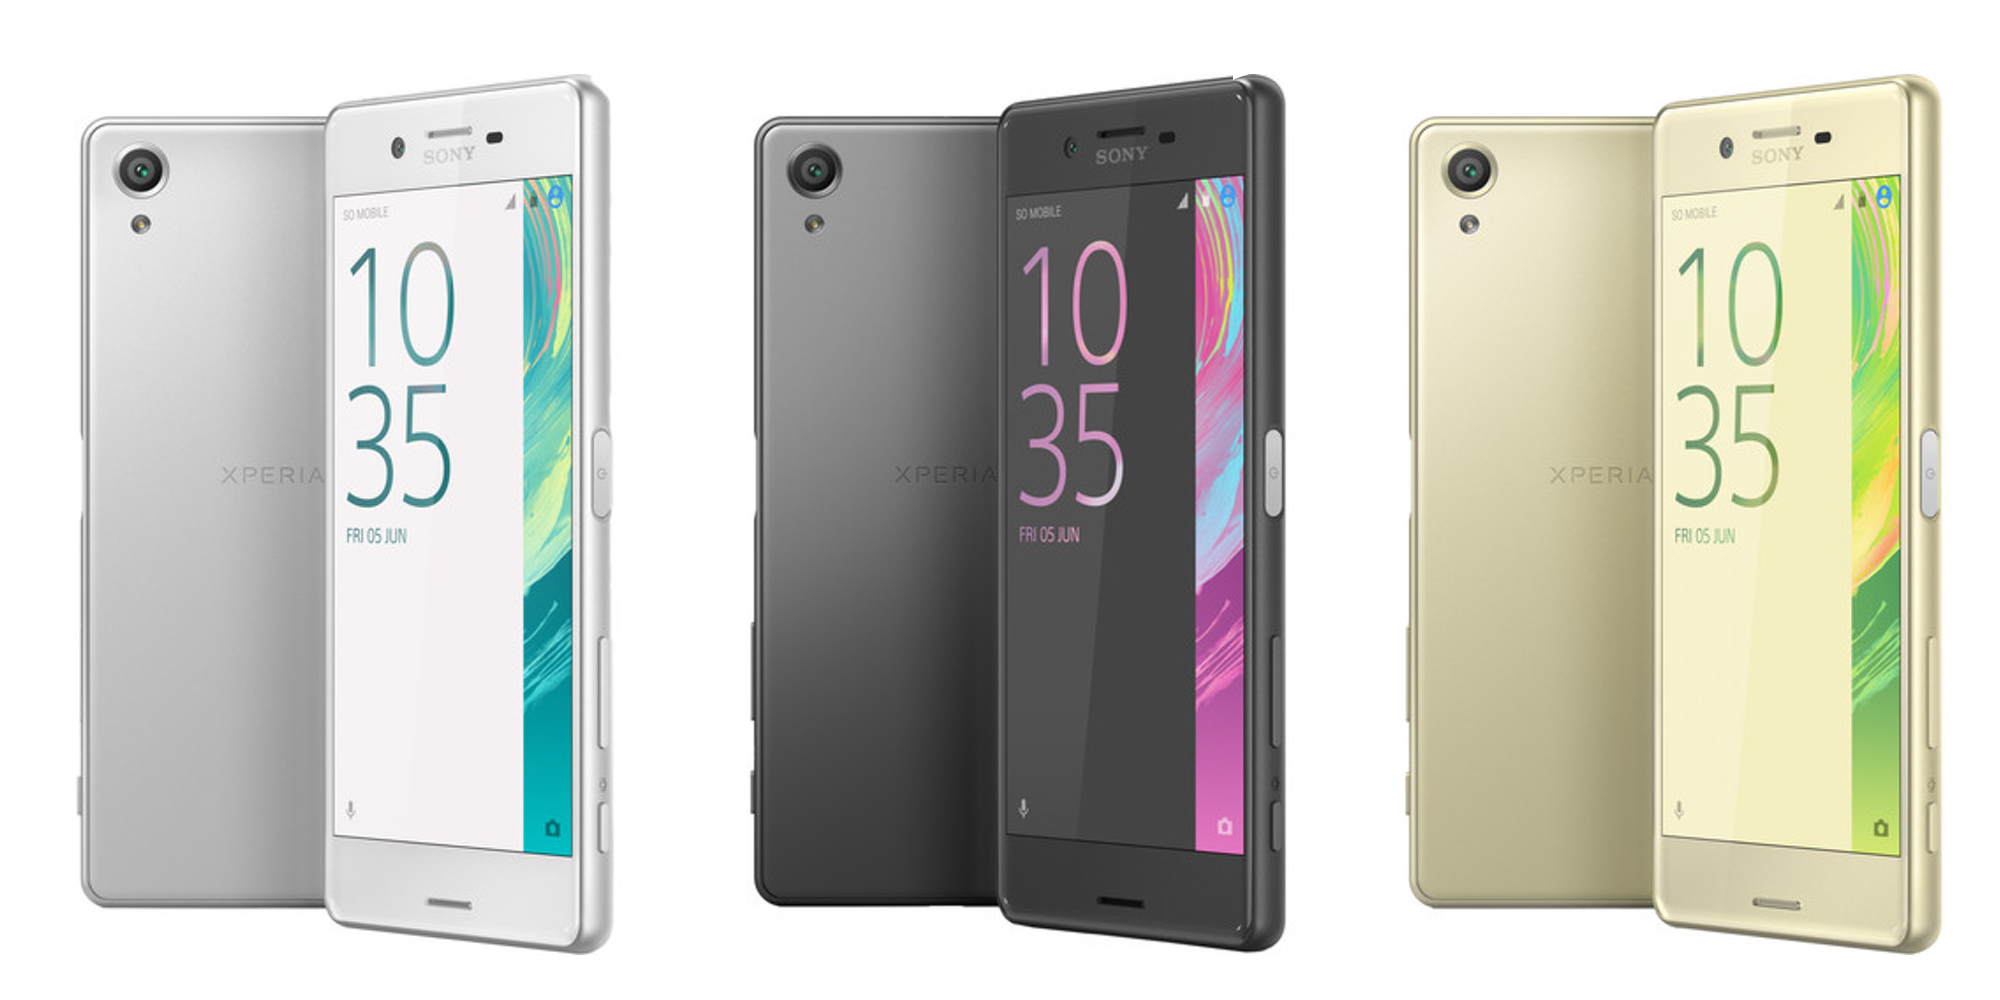 Christendom Toegeven Kwalificatie Sony Xperia X 32GB Unlocked Android Smartphone for $250 (Reg. $400) -  9to5Toys